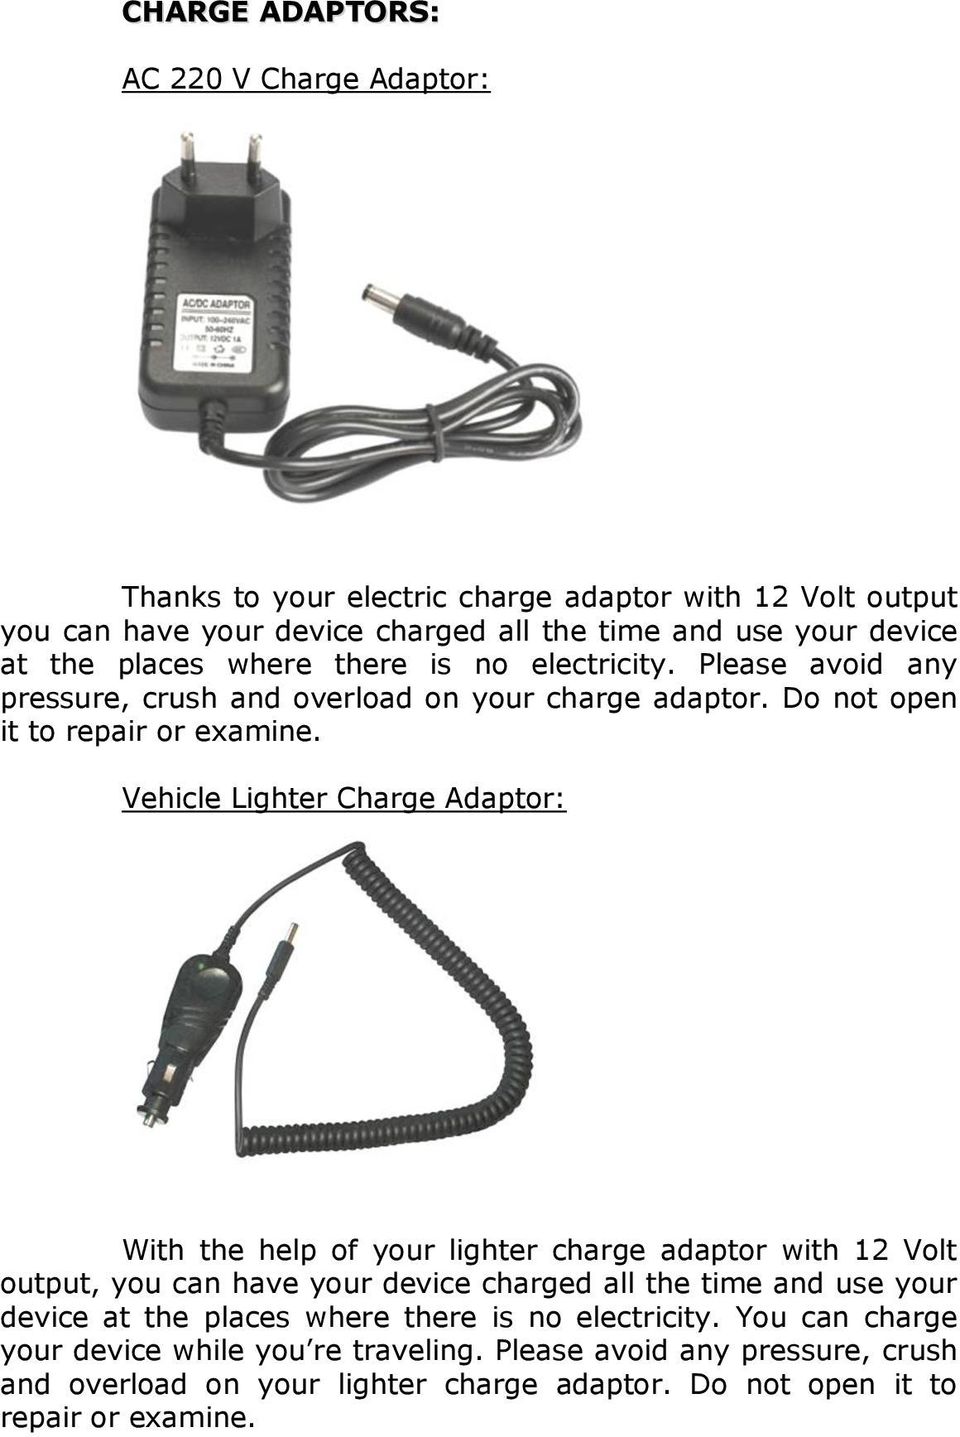 Vehicle Lighter Charge Adaptor: With the help of your lighter charge adaptor with 12 Volt output, you can have your device charged all the time and use your device at the